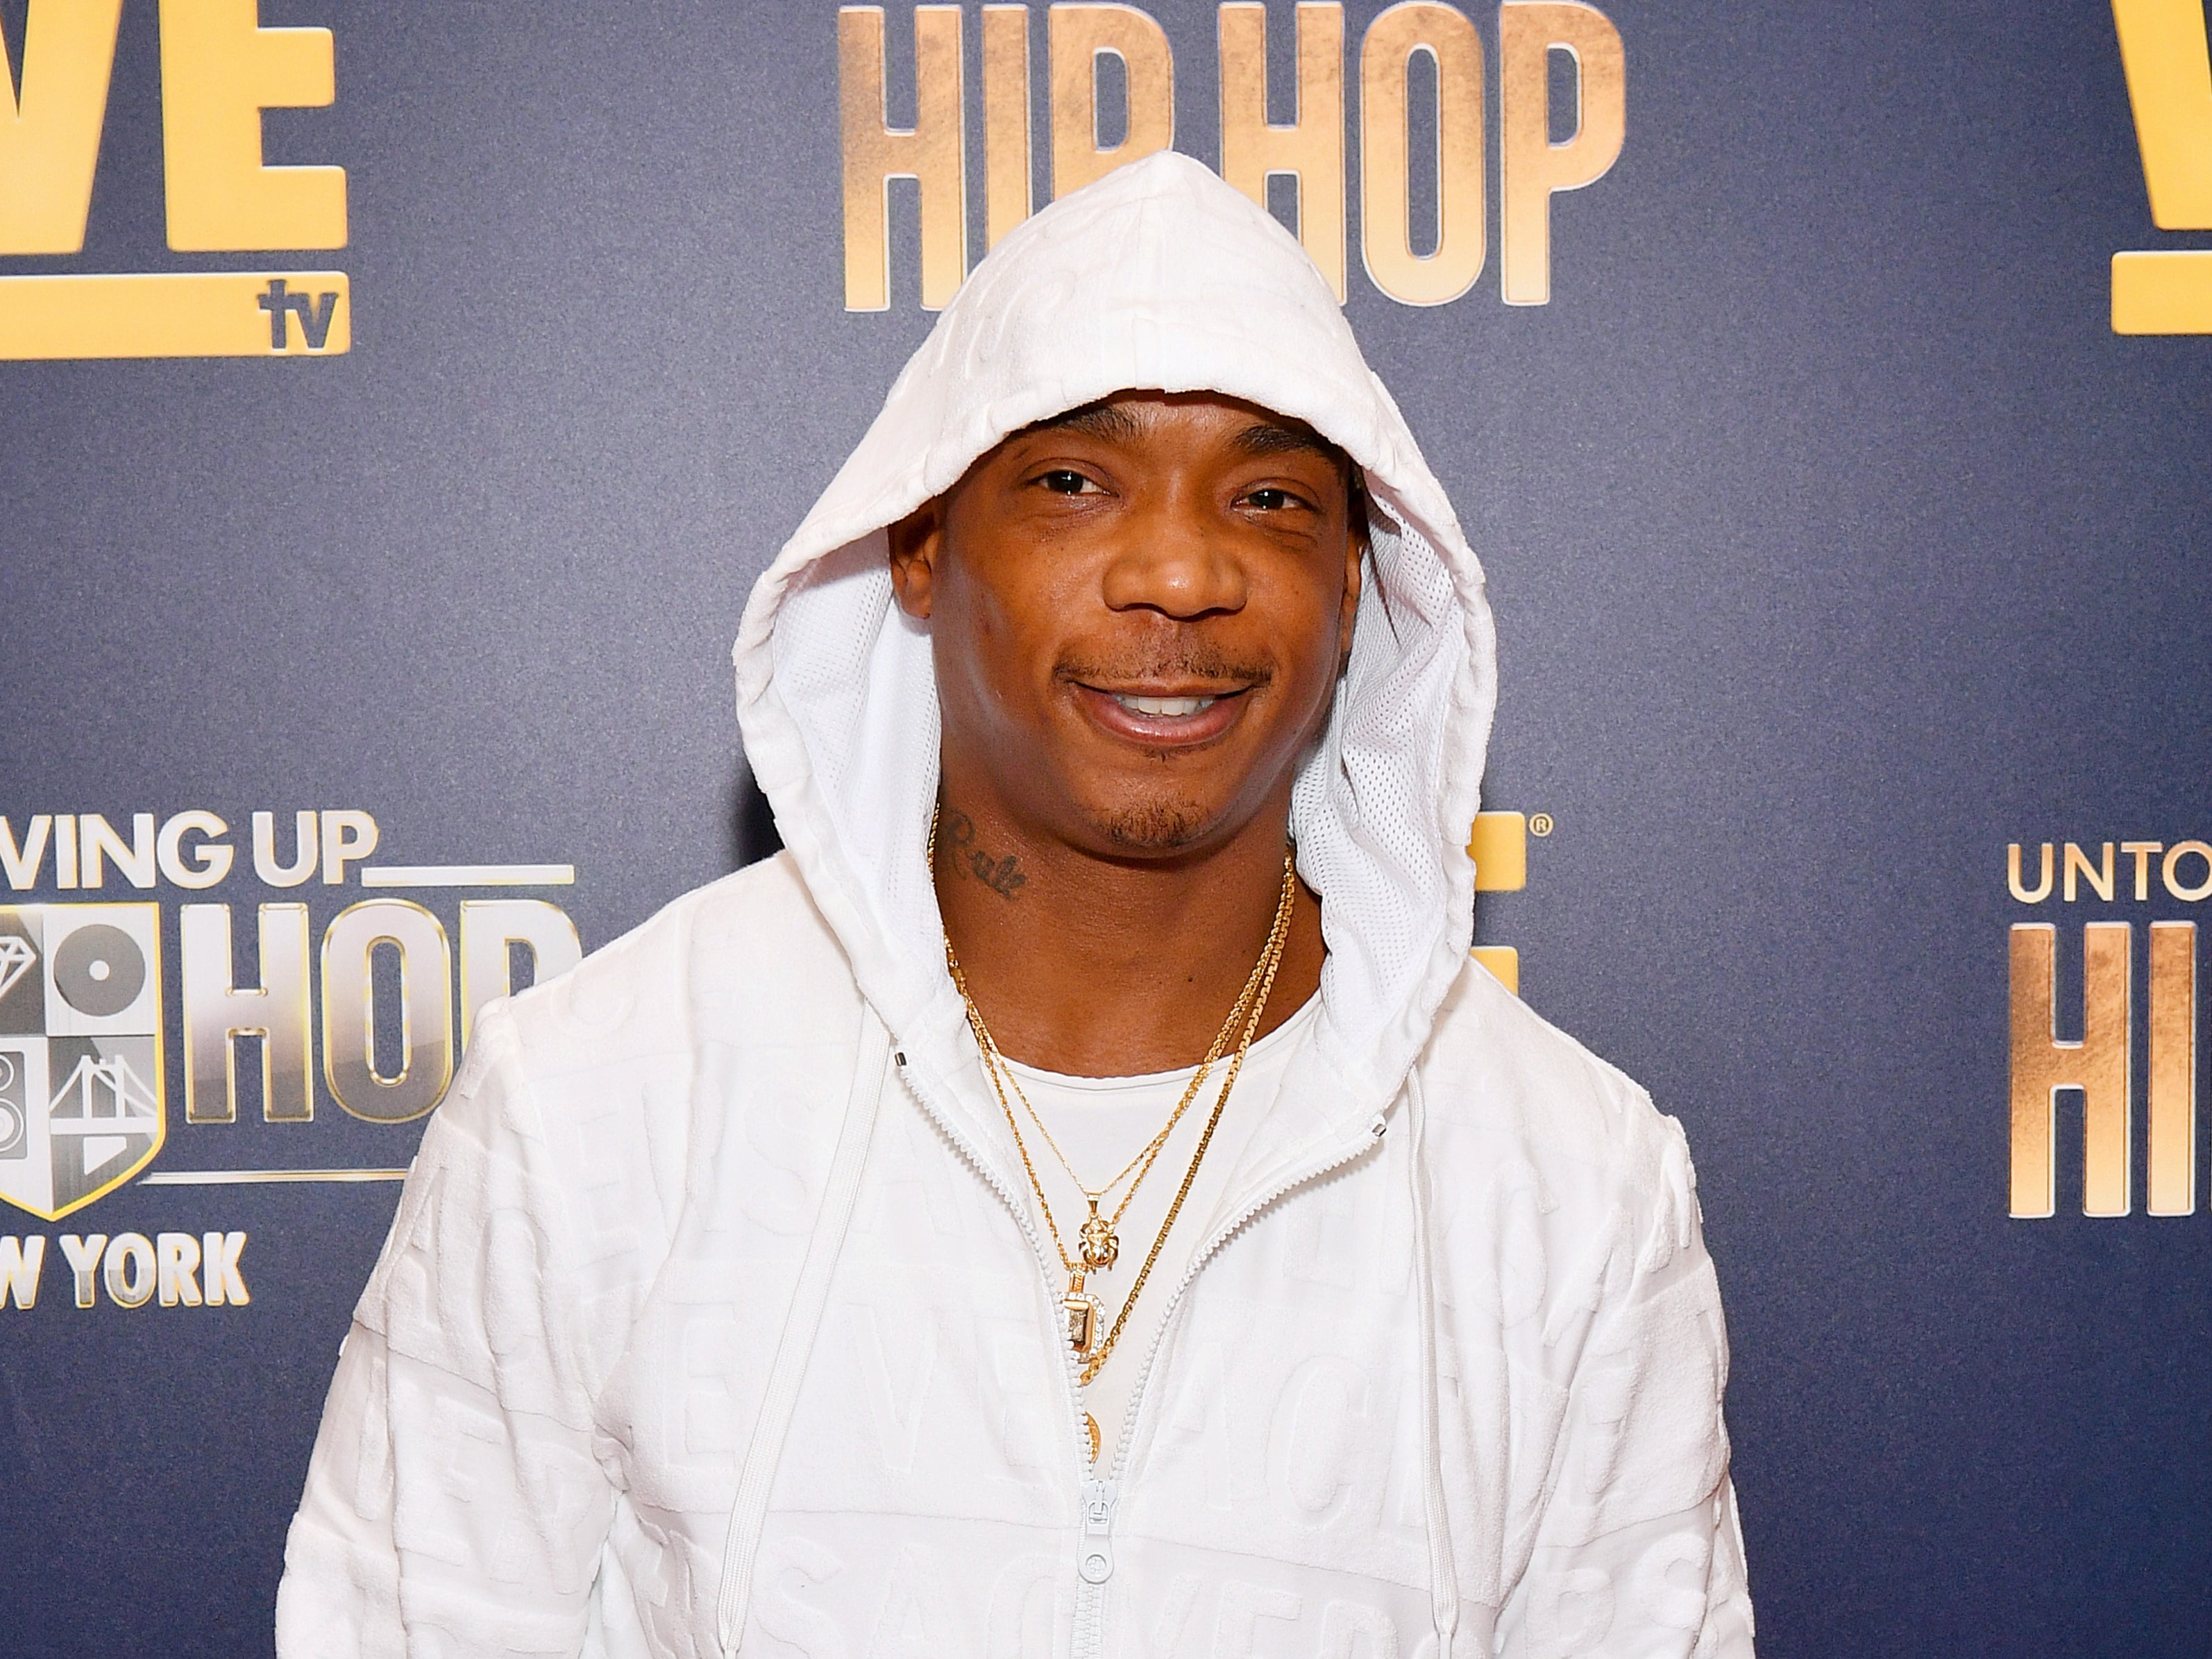 Ja Rule attends a celebration of the premieres of Growing Up Hip Hop New York and Untold Stories of Hip Hop on 19 August 2019 in New York City